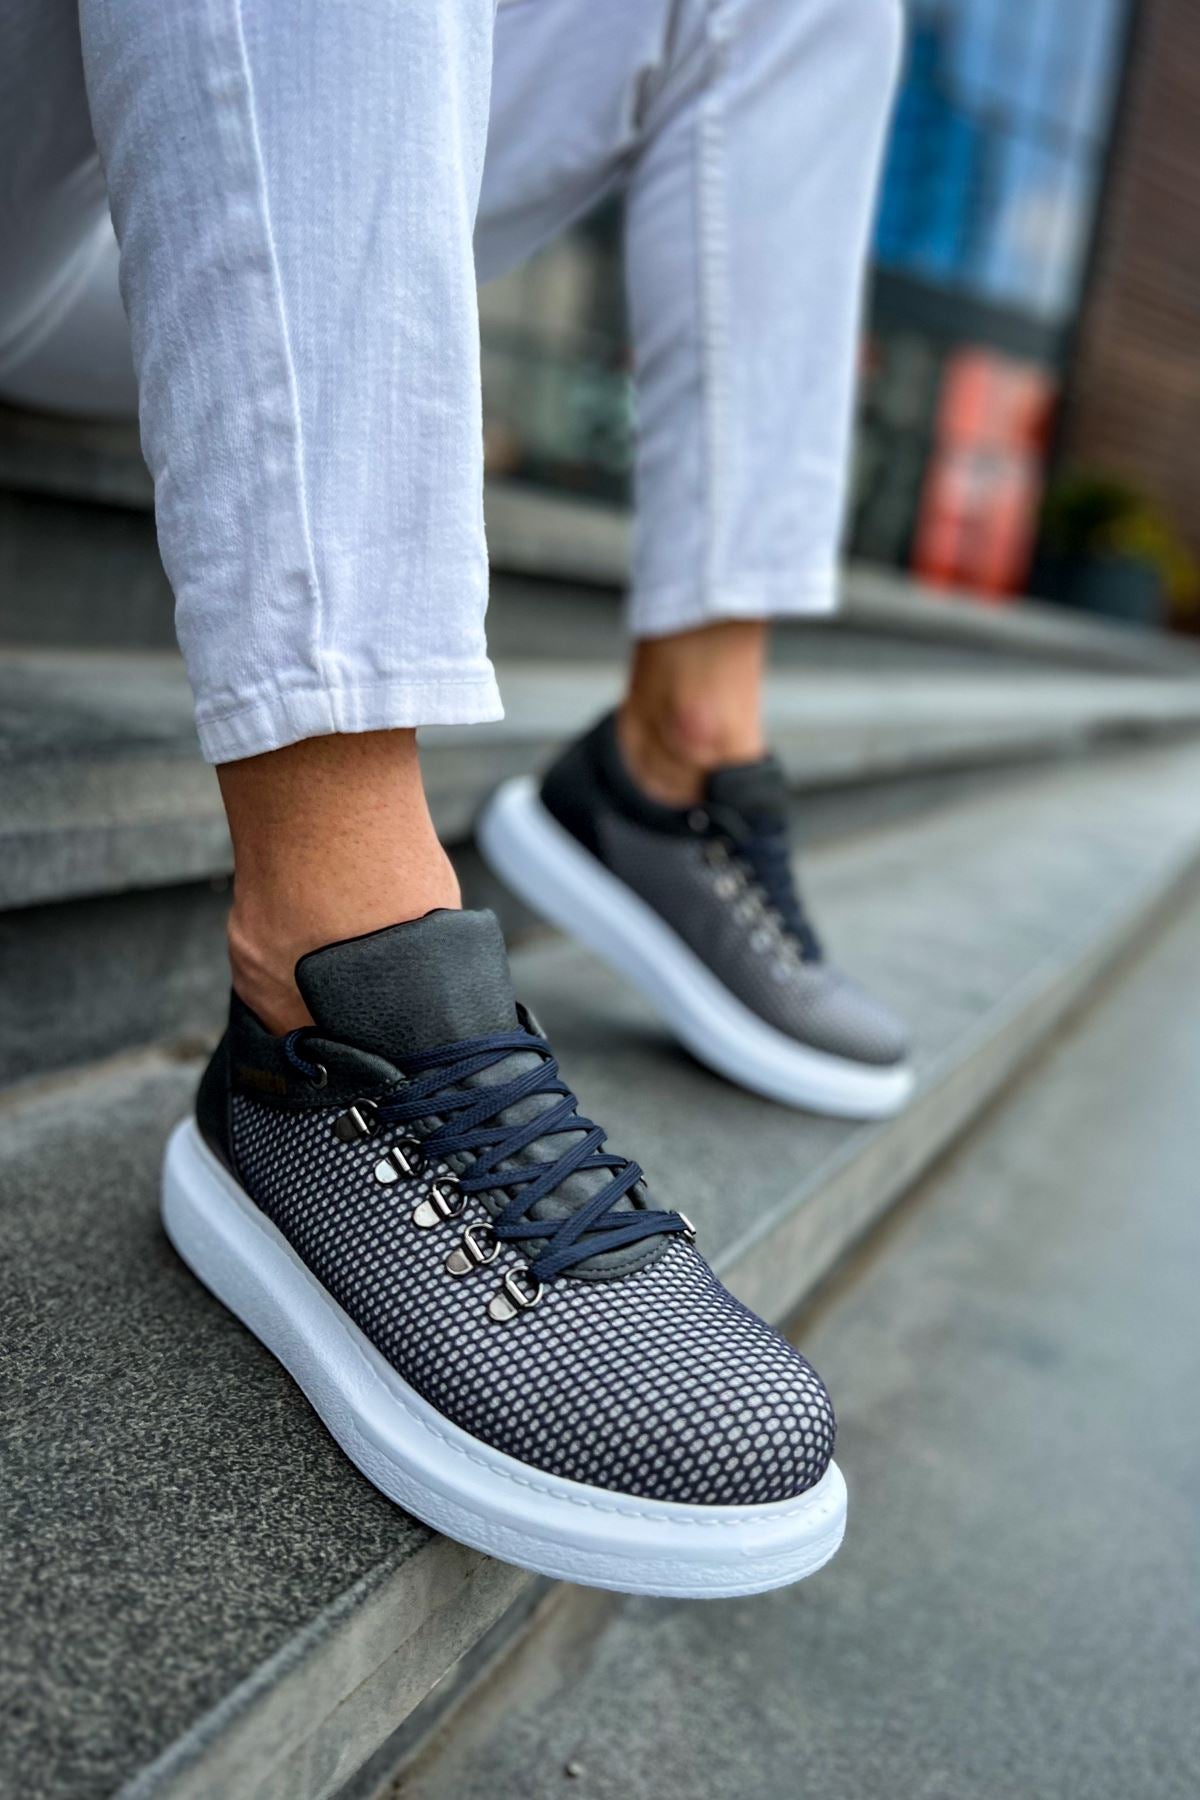 CH021 Men's Unisex Grey-White Sole Honeycomb Processing Casual Sneaker Sports Shoes - STREETMODE ™